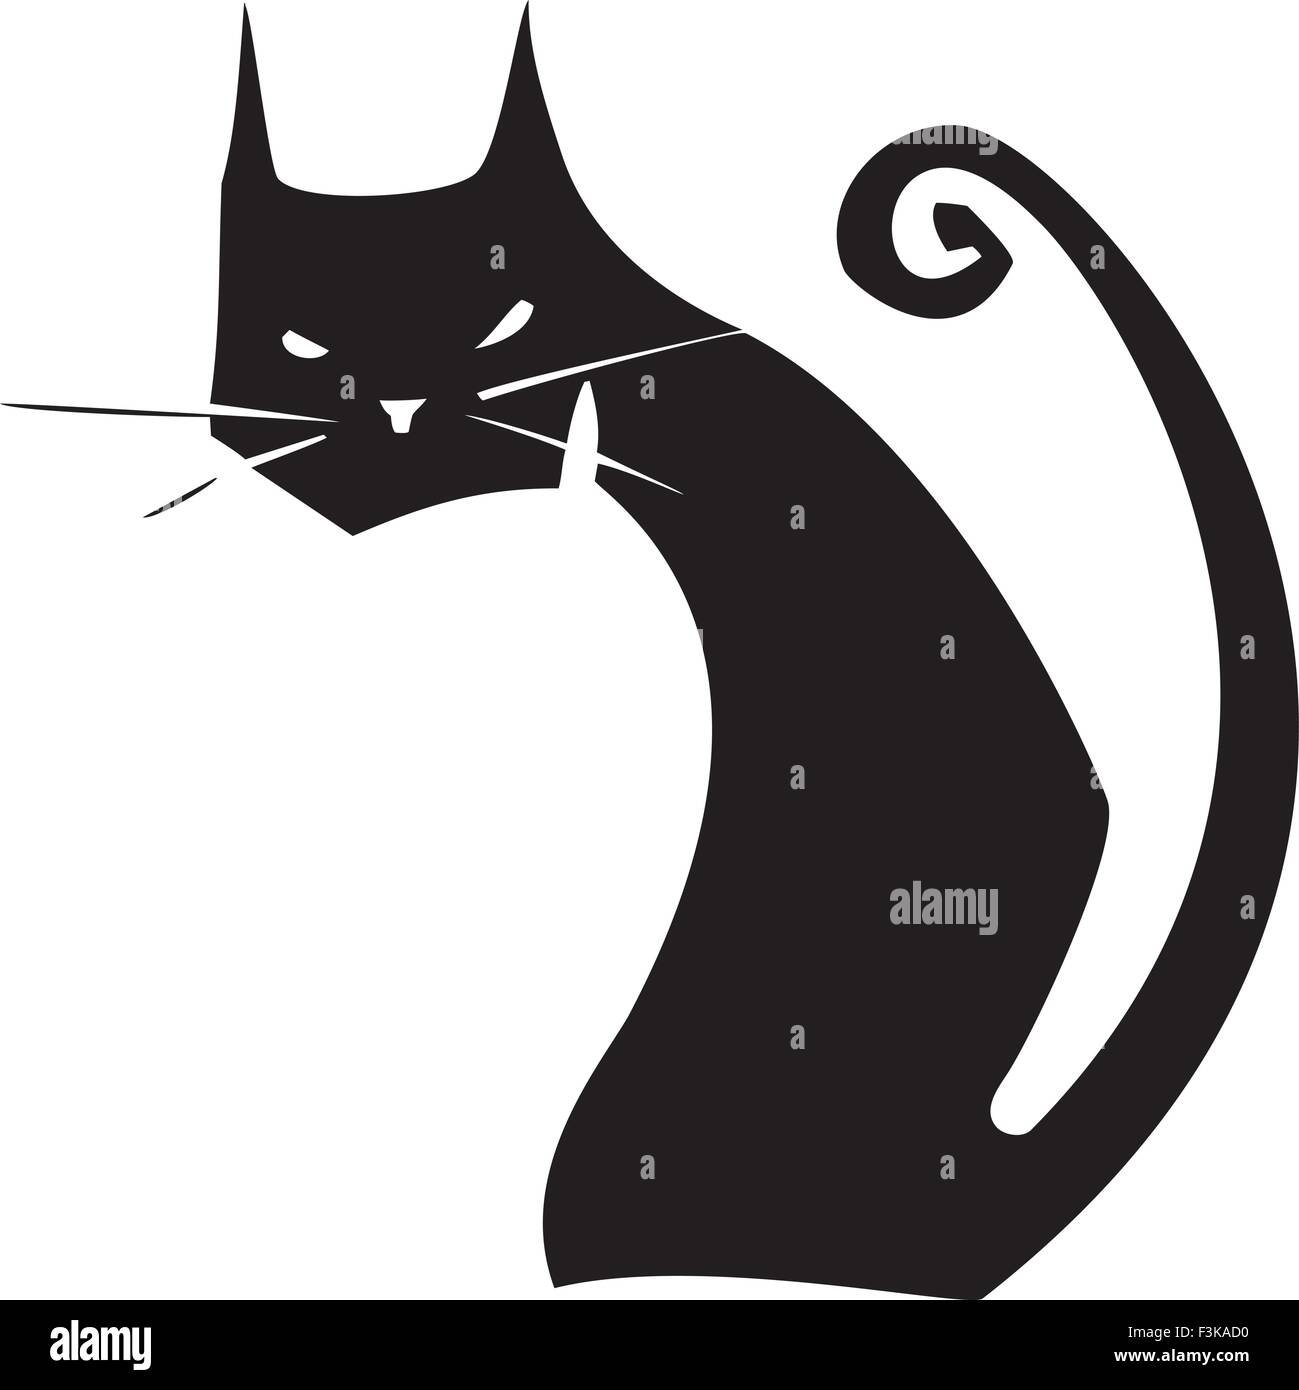 Simple image of a black cat with a curly tail Stock Vector